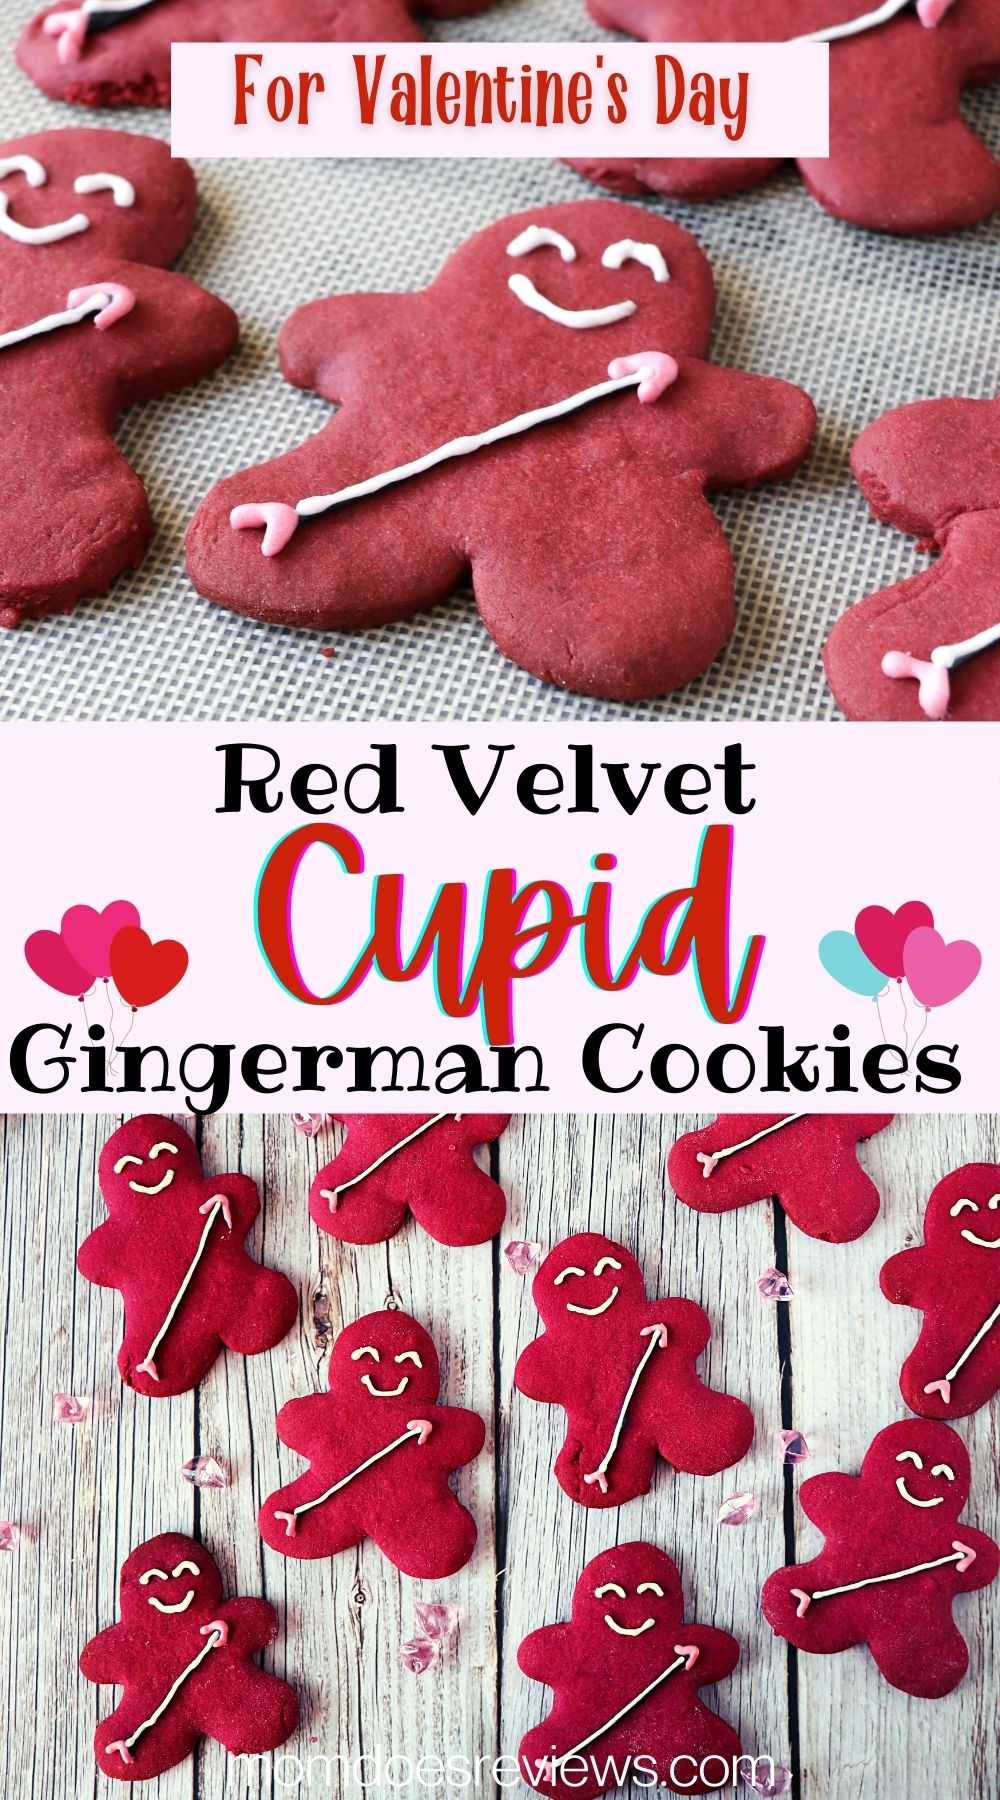 Red Velvet Cupid Gingerman Cookies for Valentine's Day!